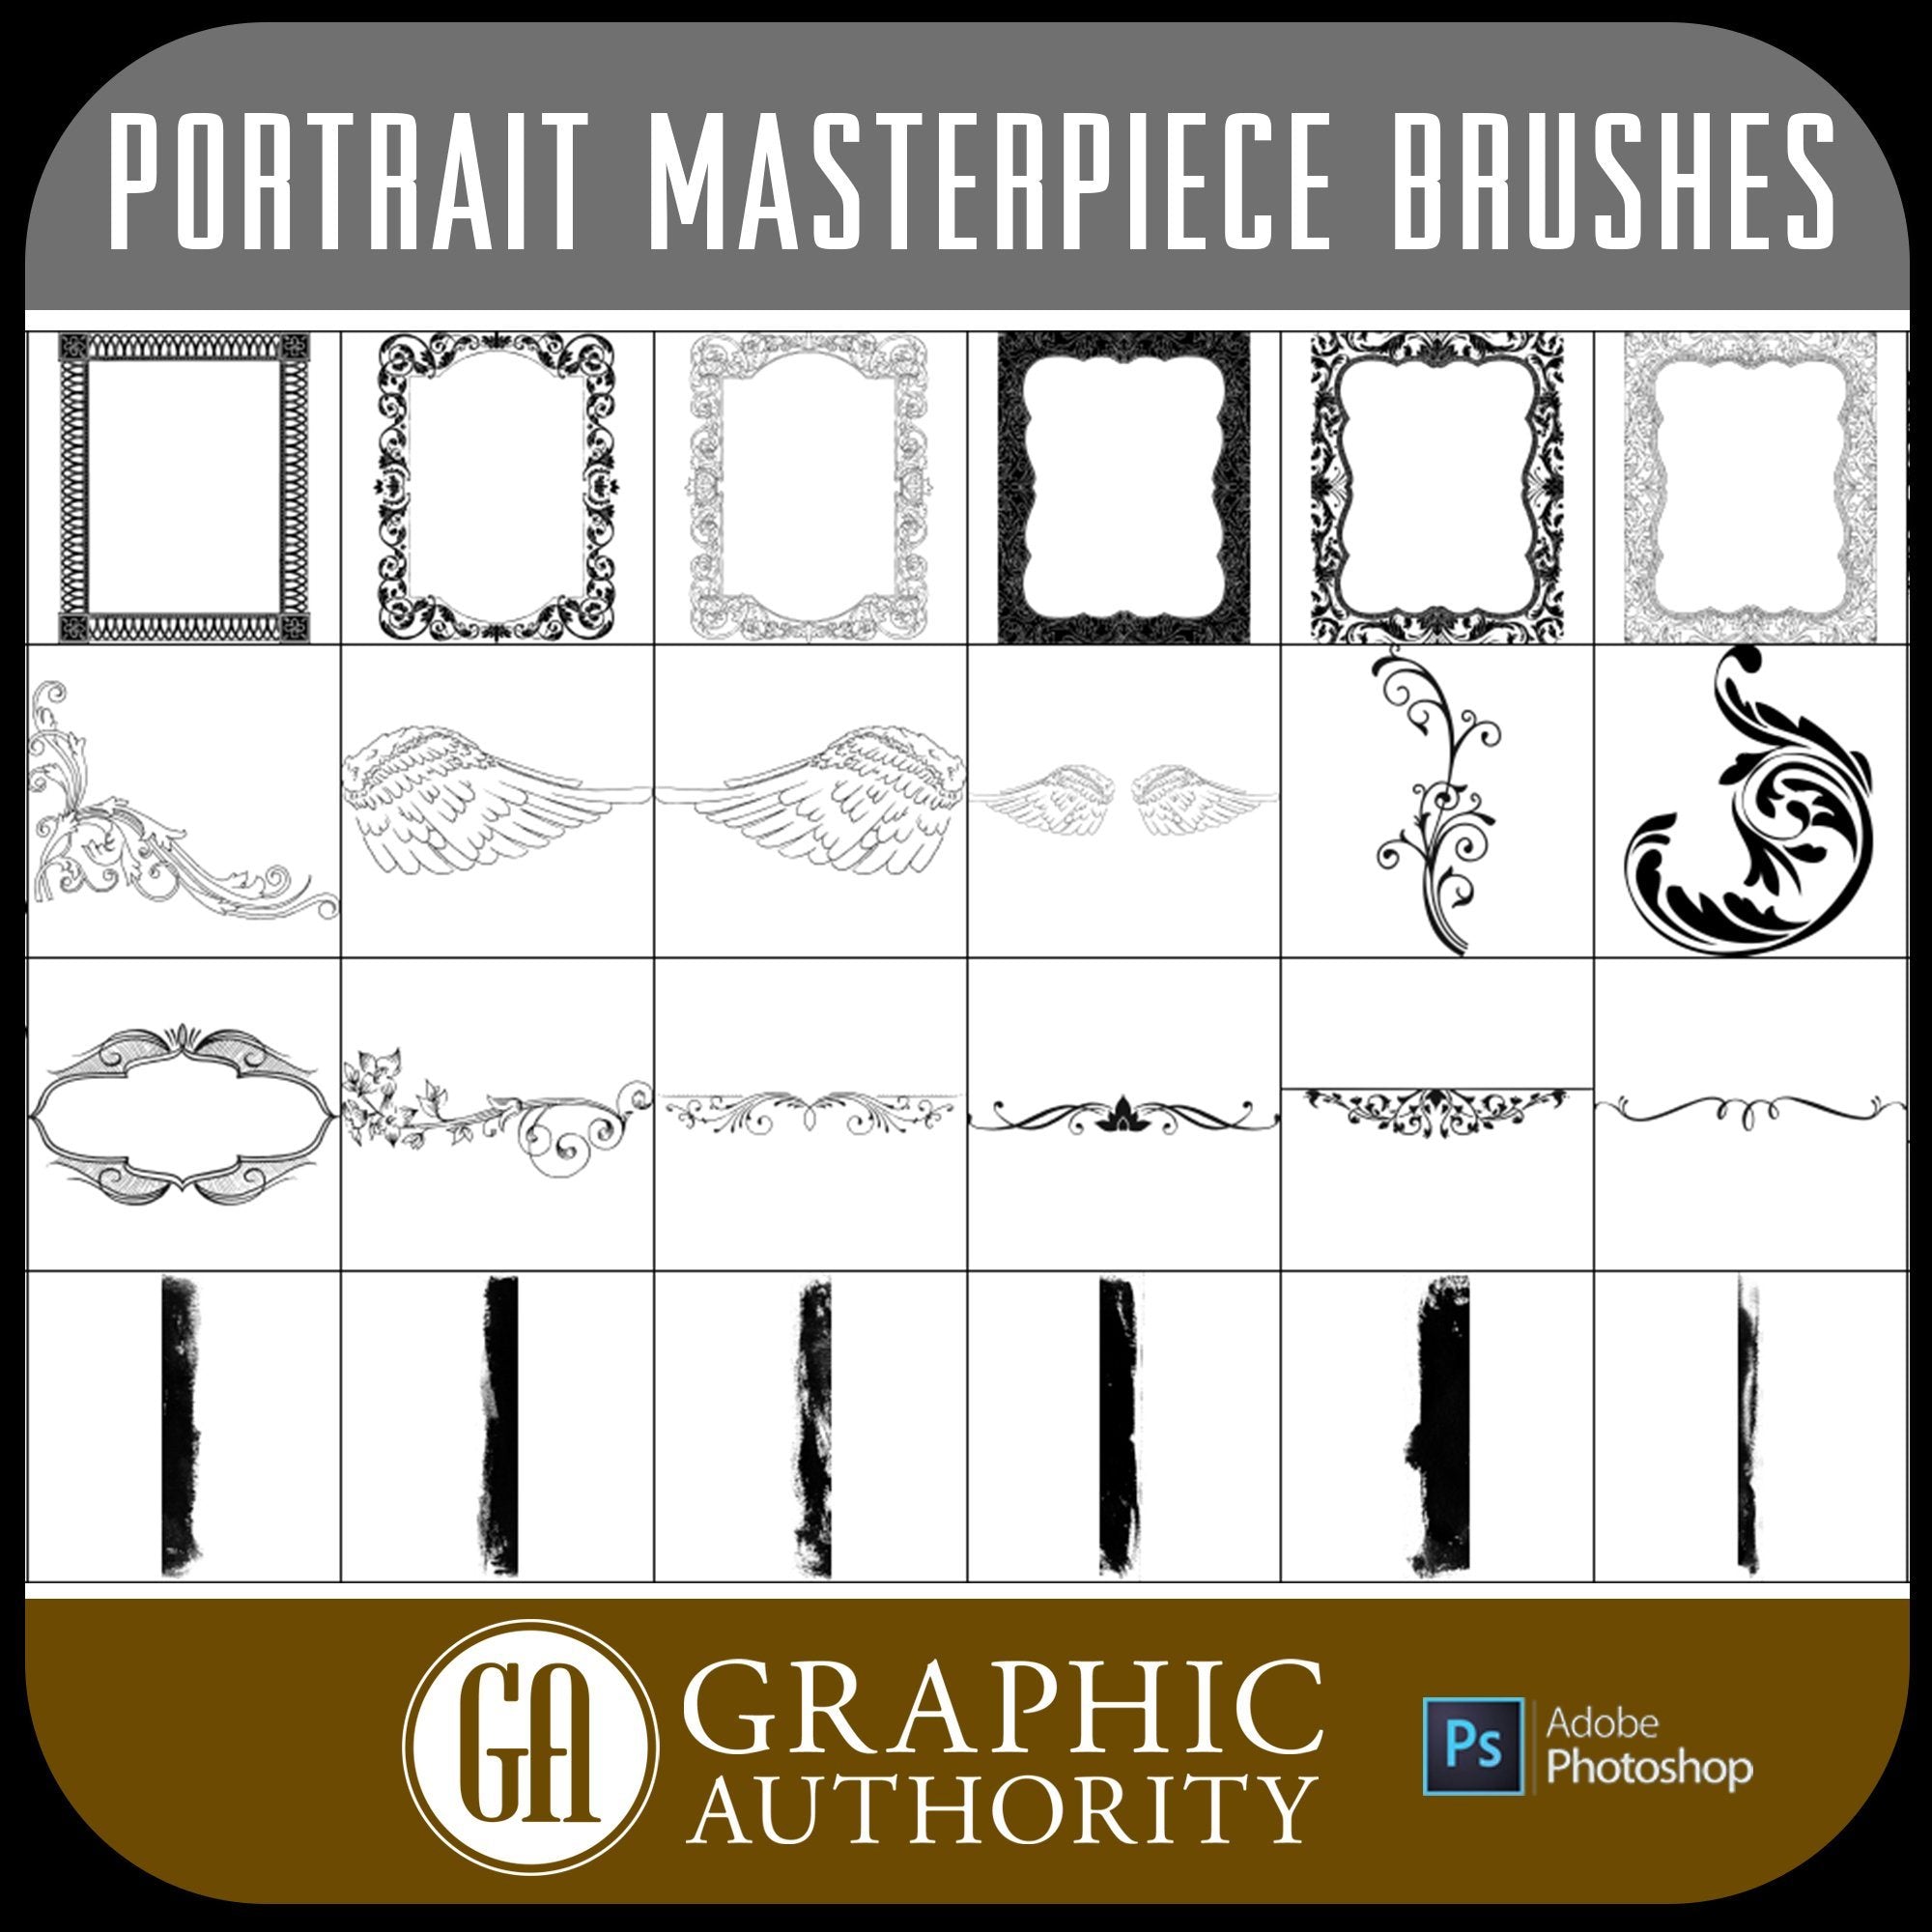 Portrait Masterpiece Collection - Photoshop ABR Brushes-Photoshop Template - Graphic Authority